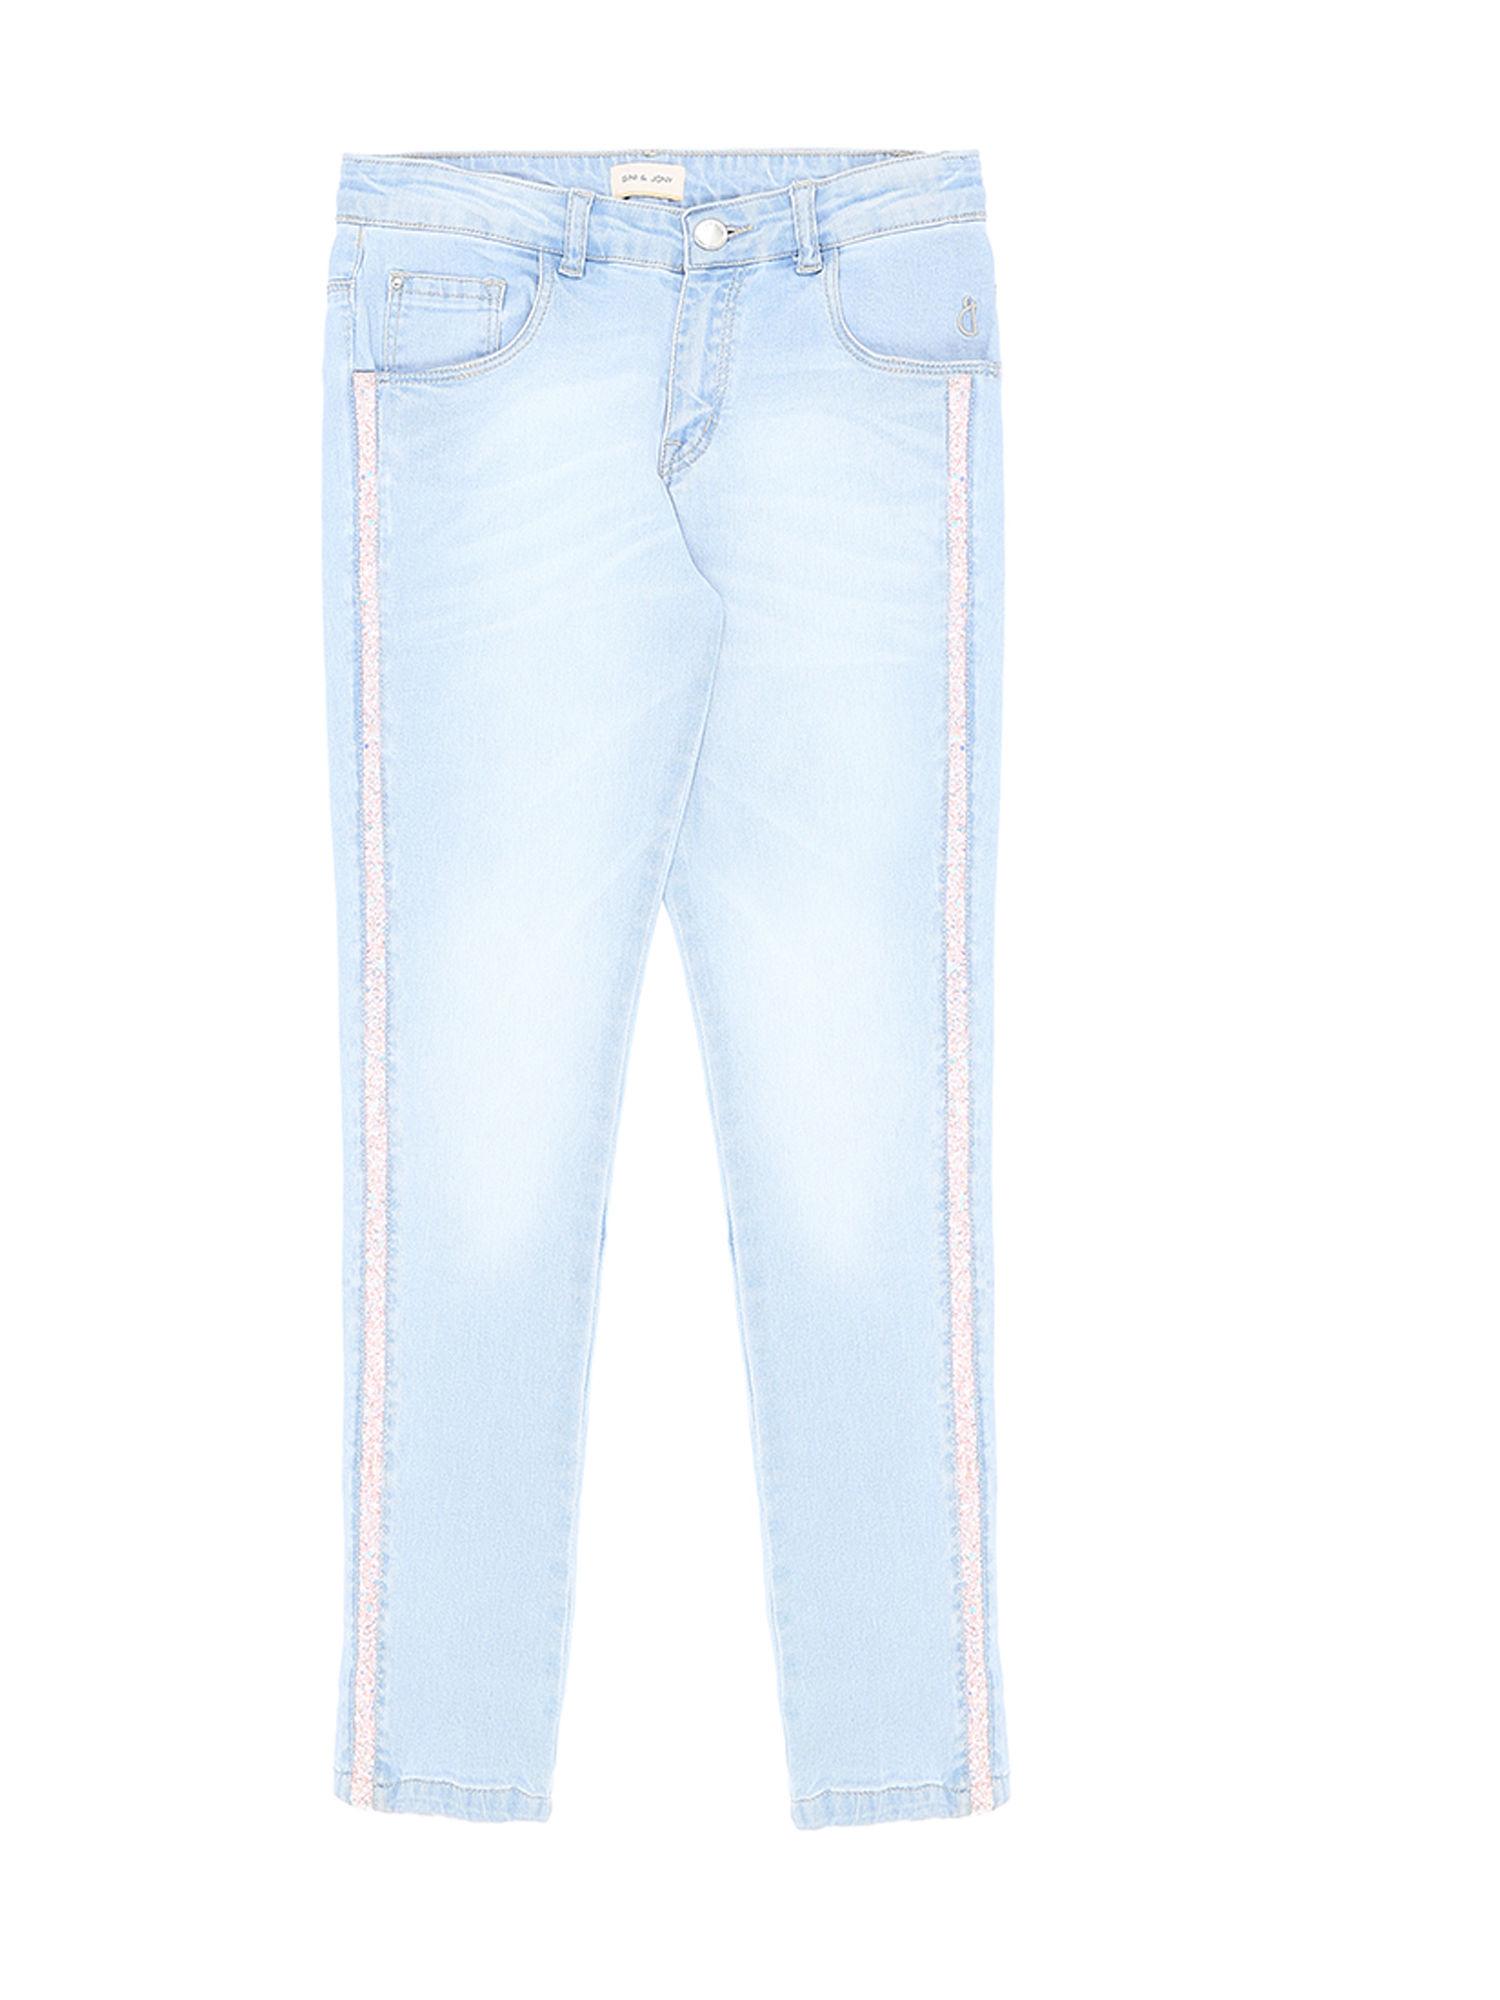 light blue bejeweled side taping jeans